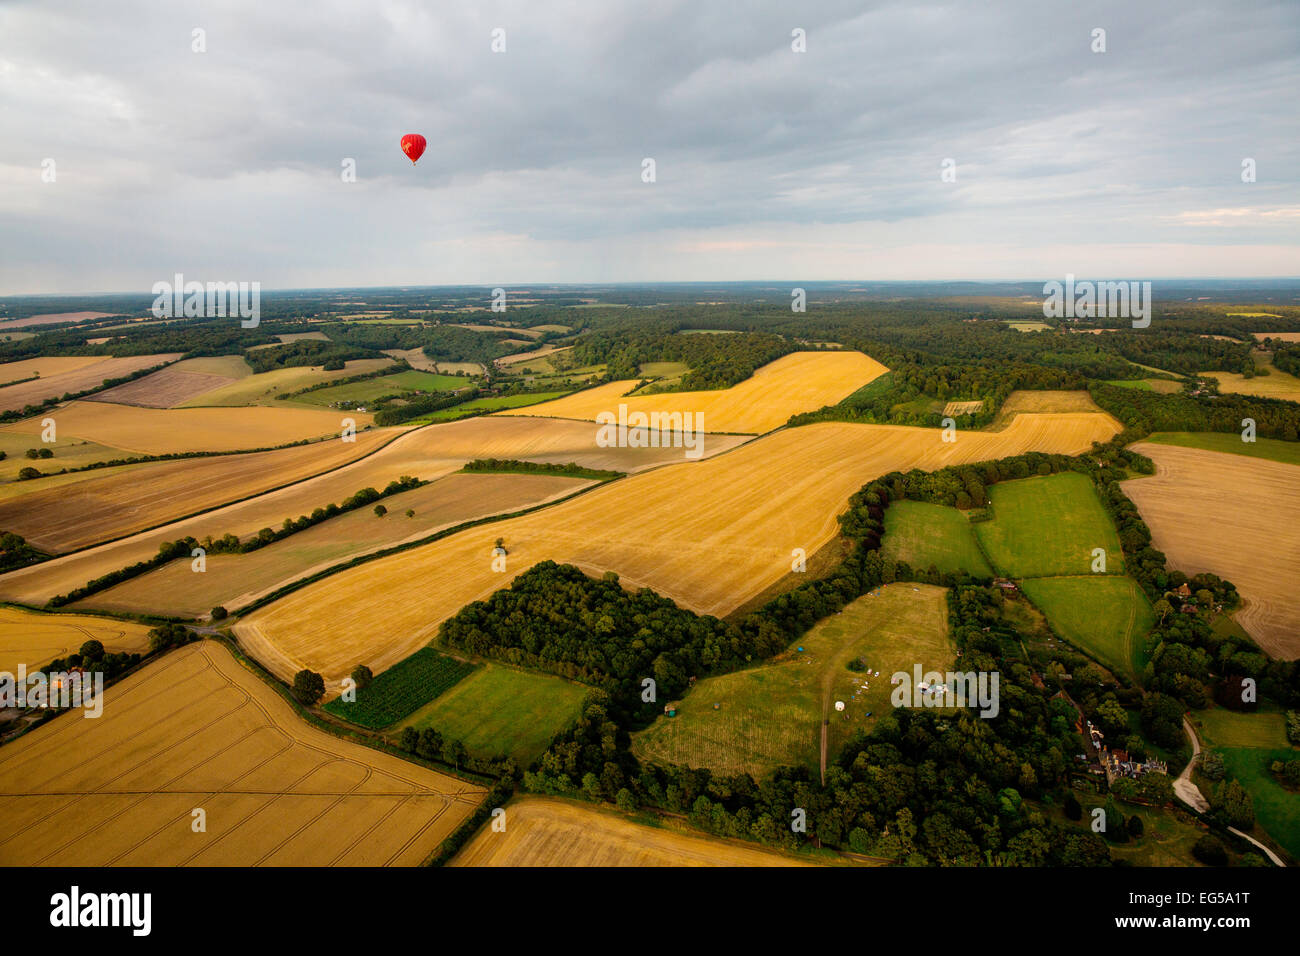 Distant view of red hot air balloon flying over rural landscape, South Oxfordshire, England Stock Photo